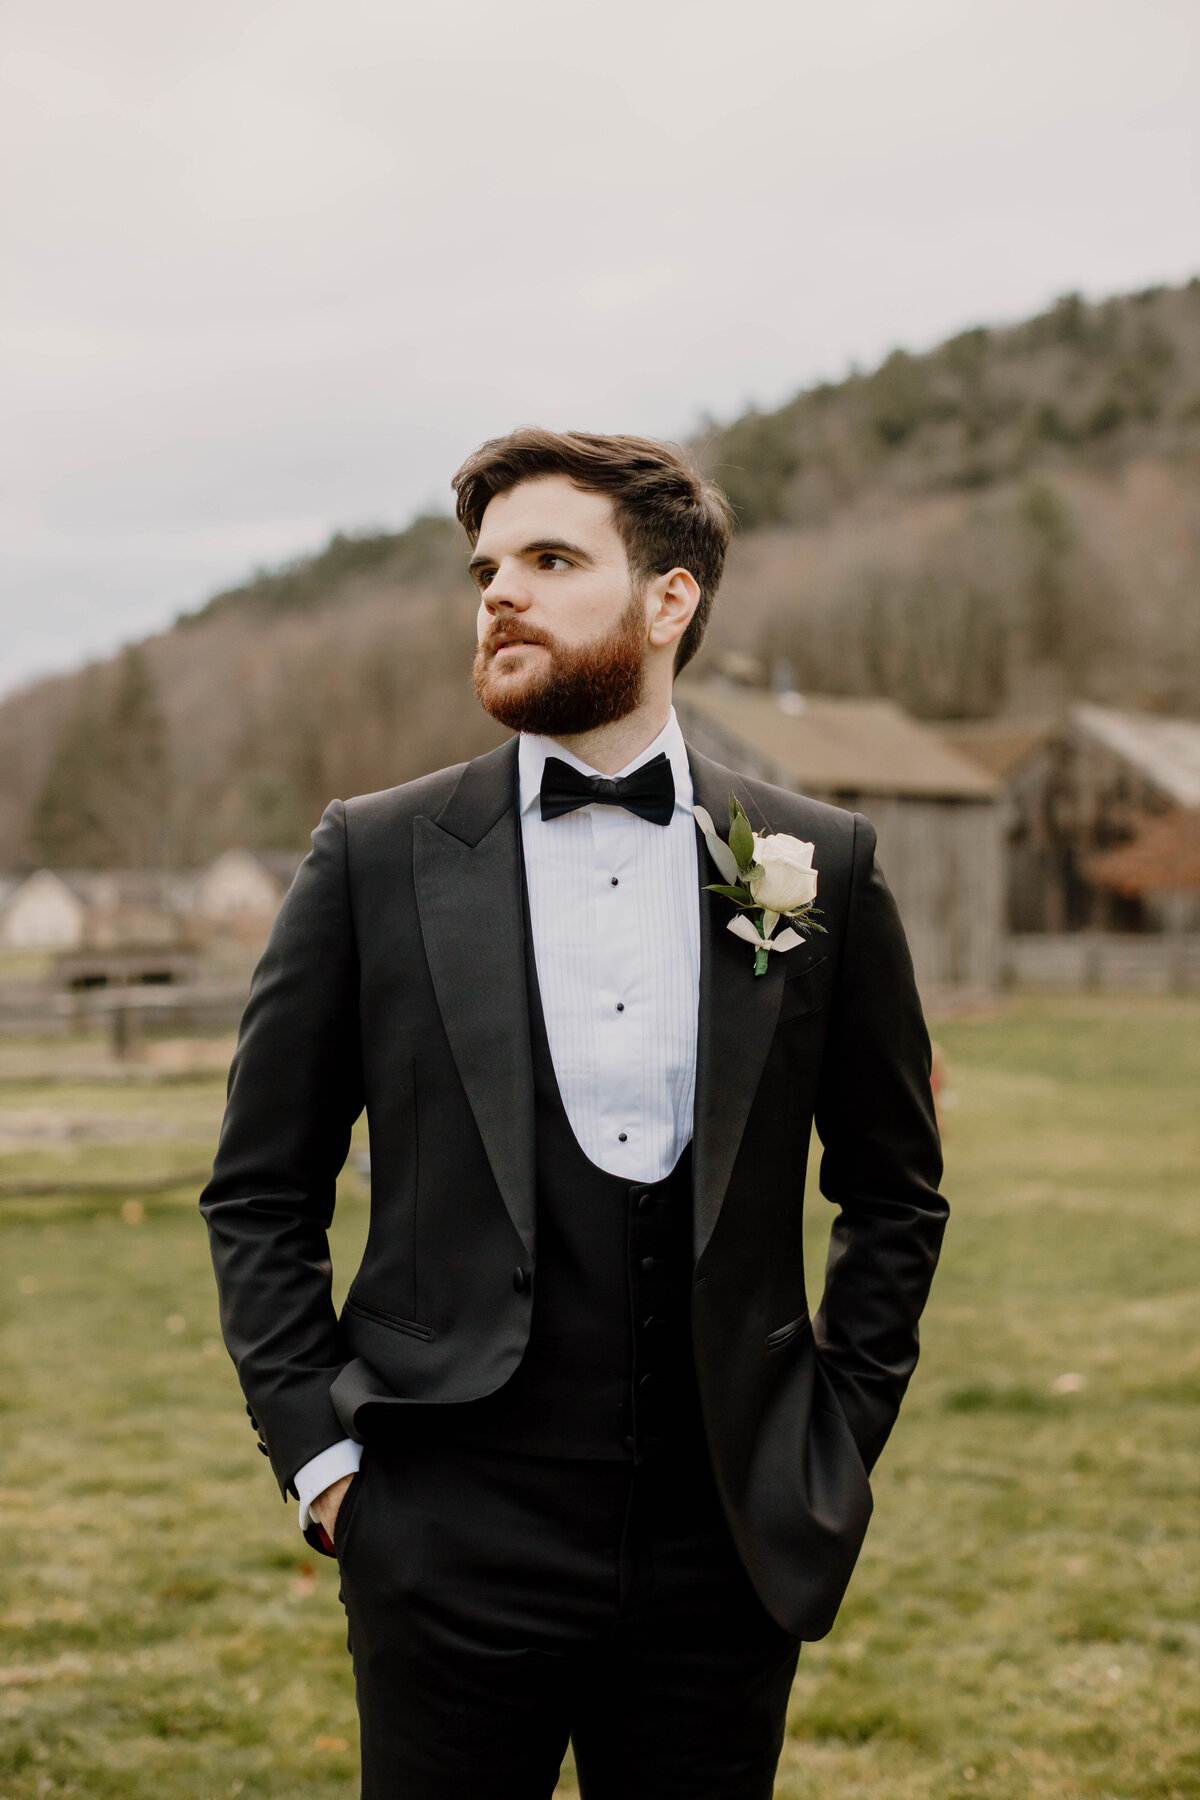 Wedding Photographer in Cooperstown NY, Groom at Farmer's Museum